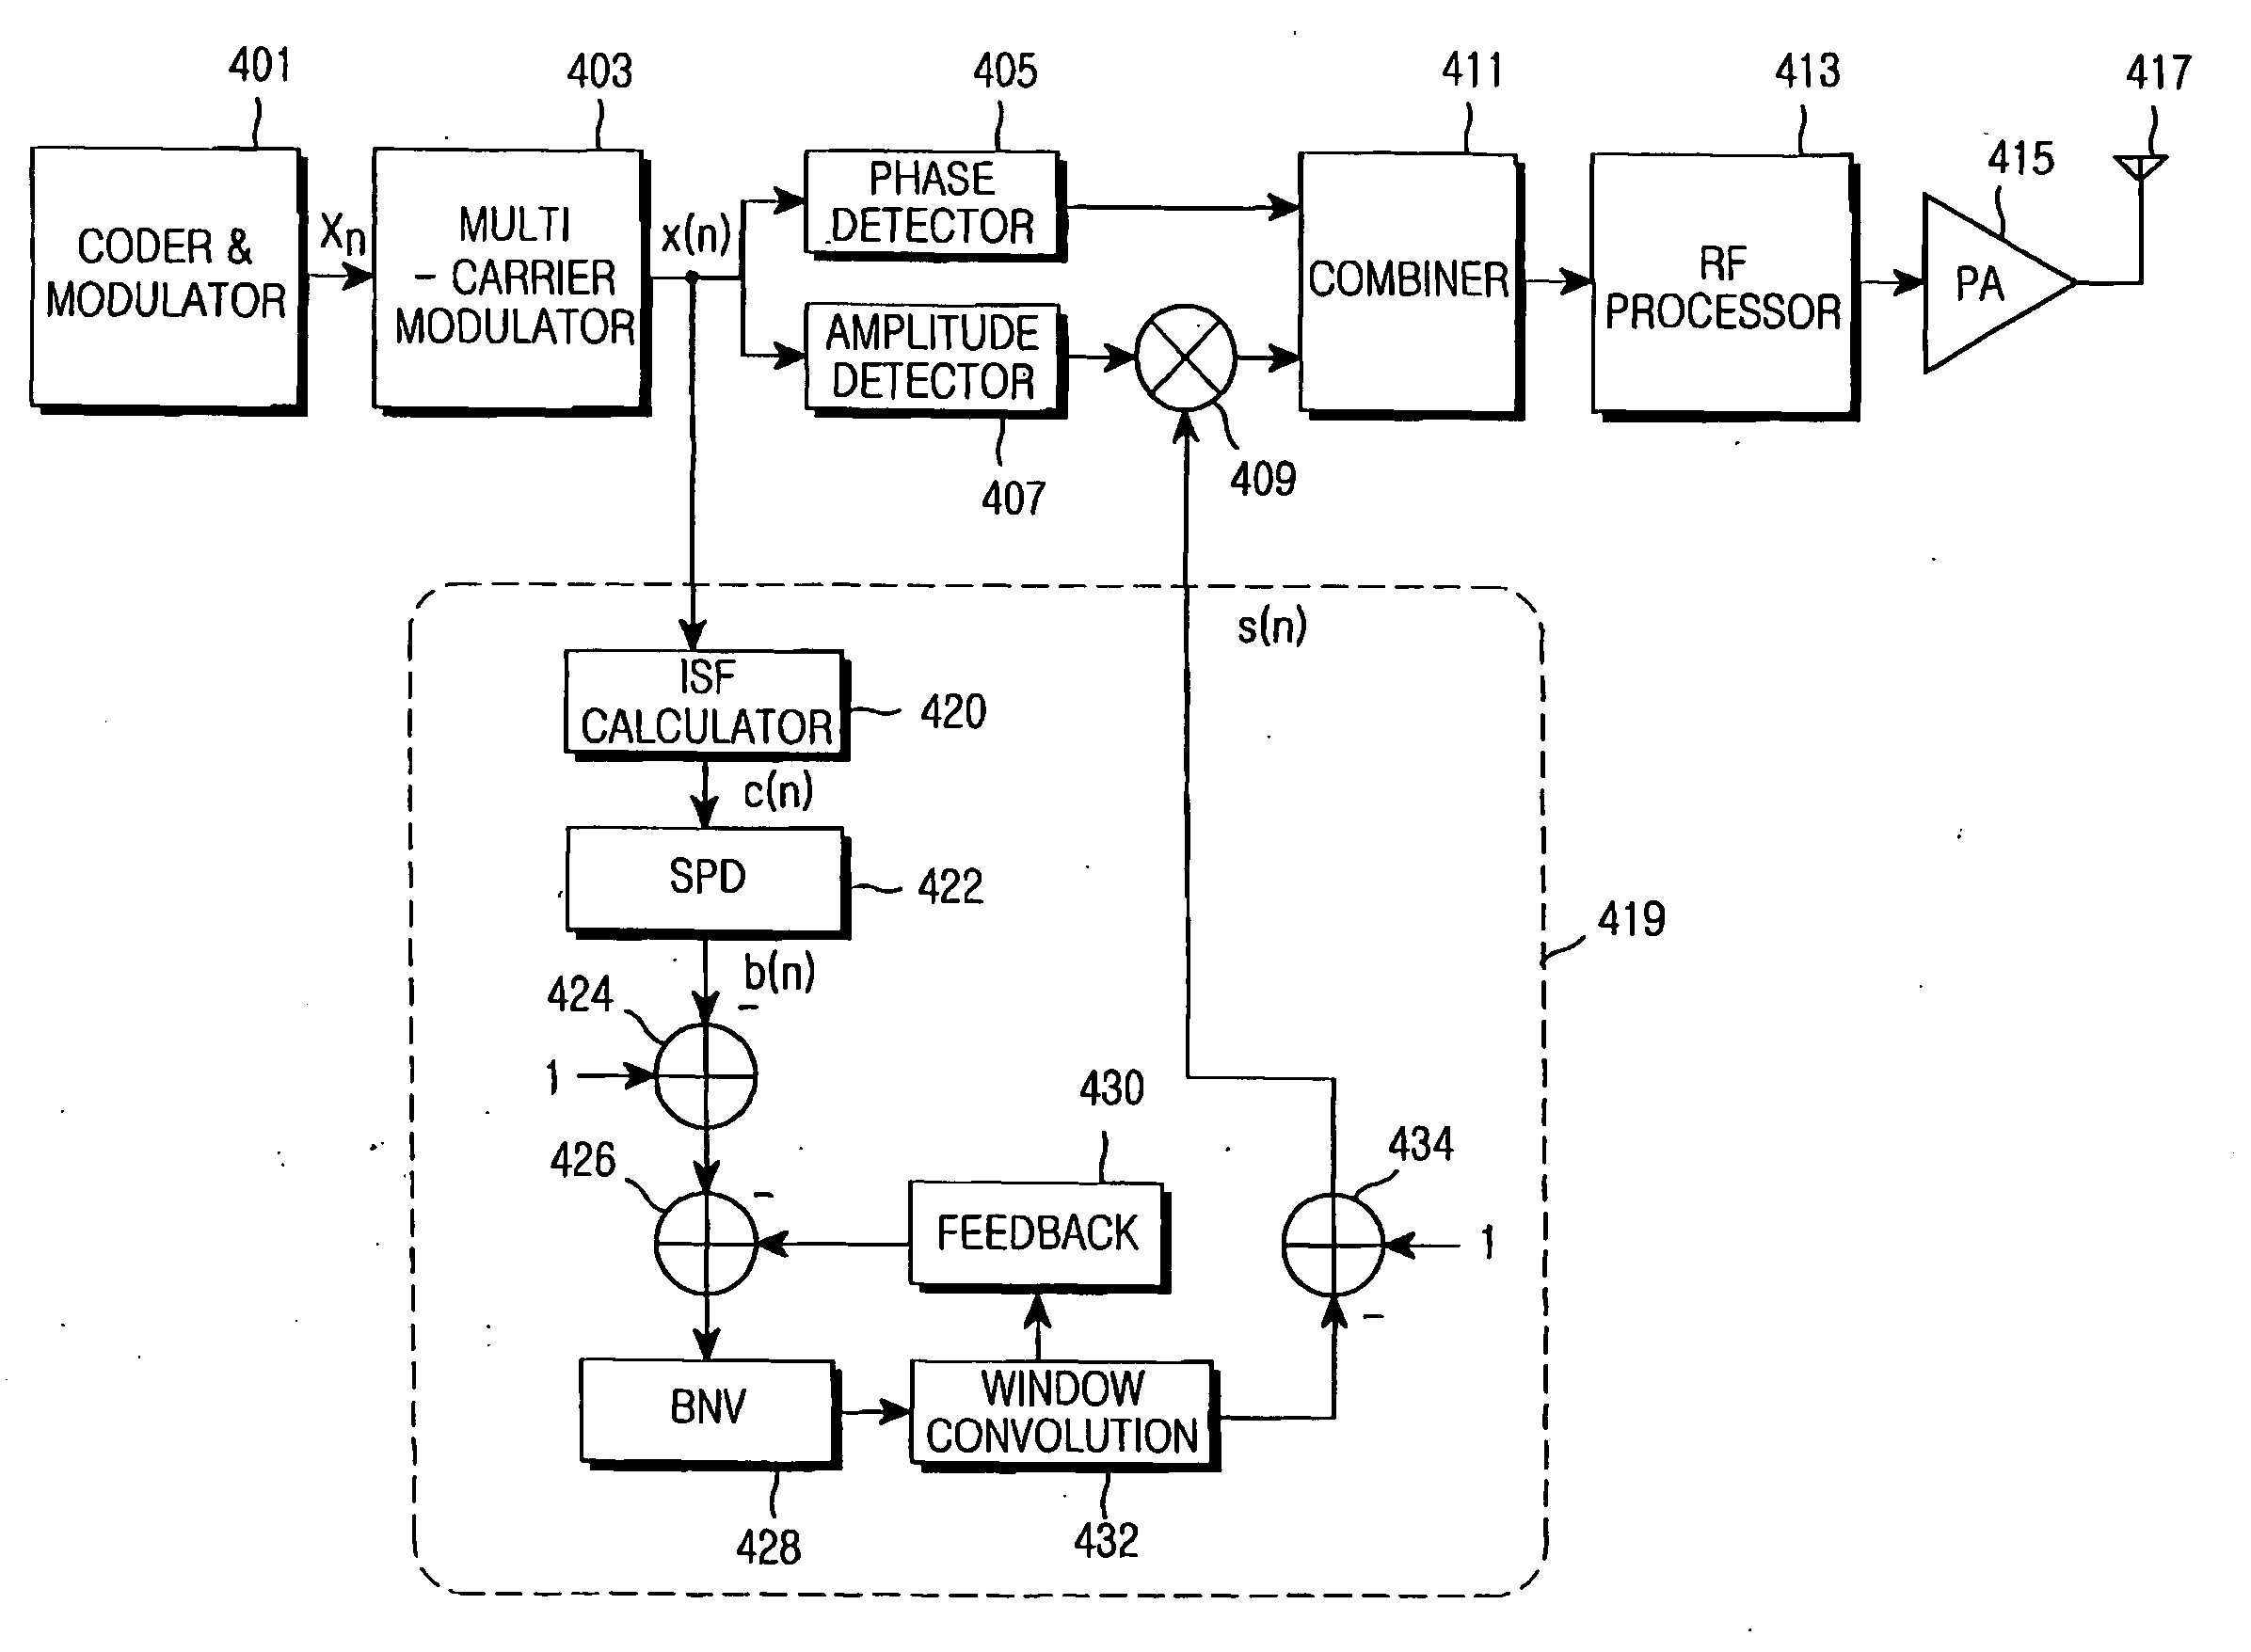 Apparatus and method for reducing peak-to-average power ratio in a broadband wireless communication system